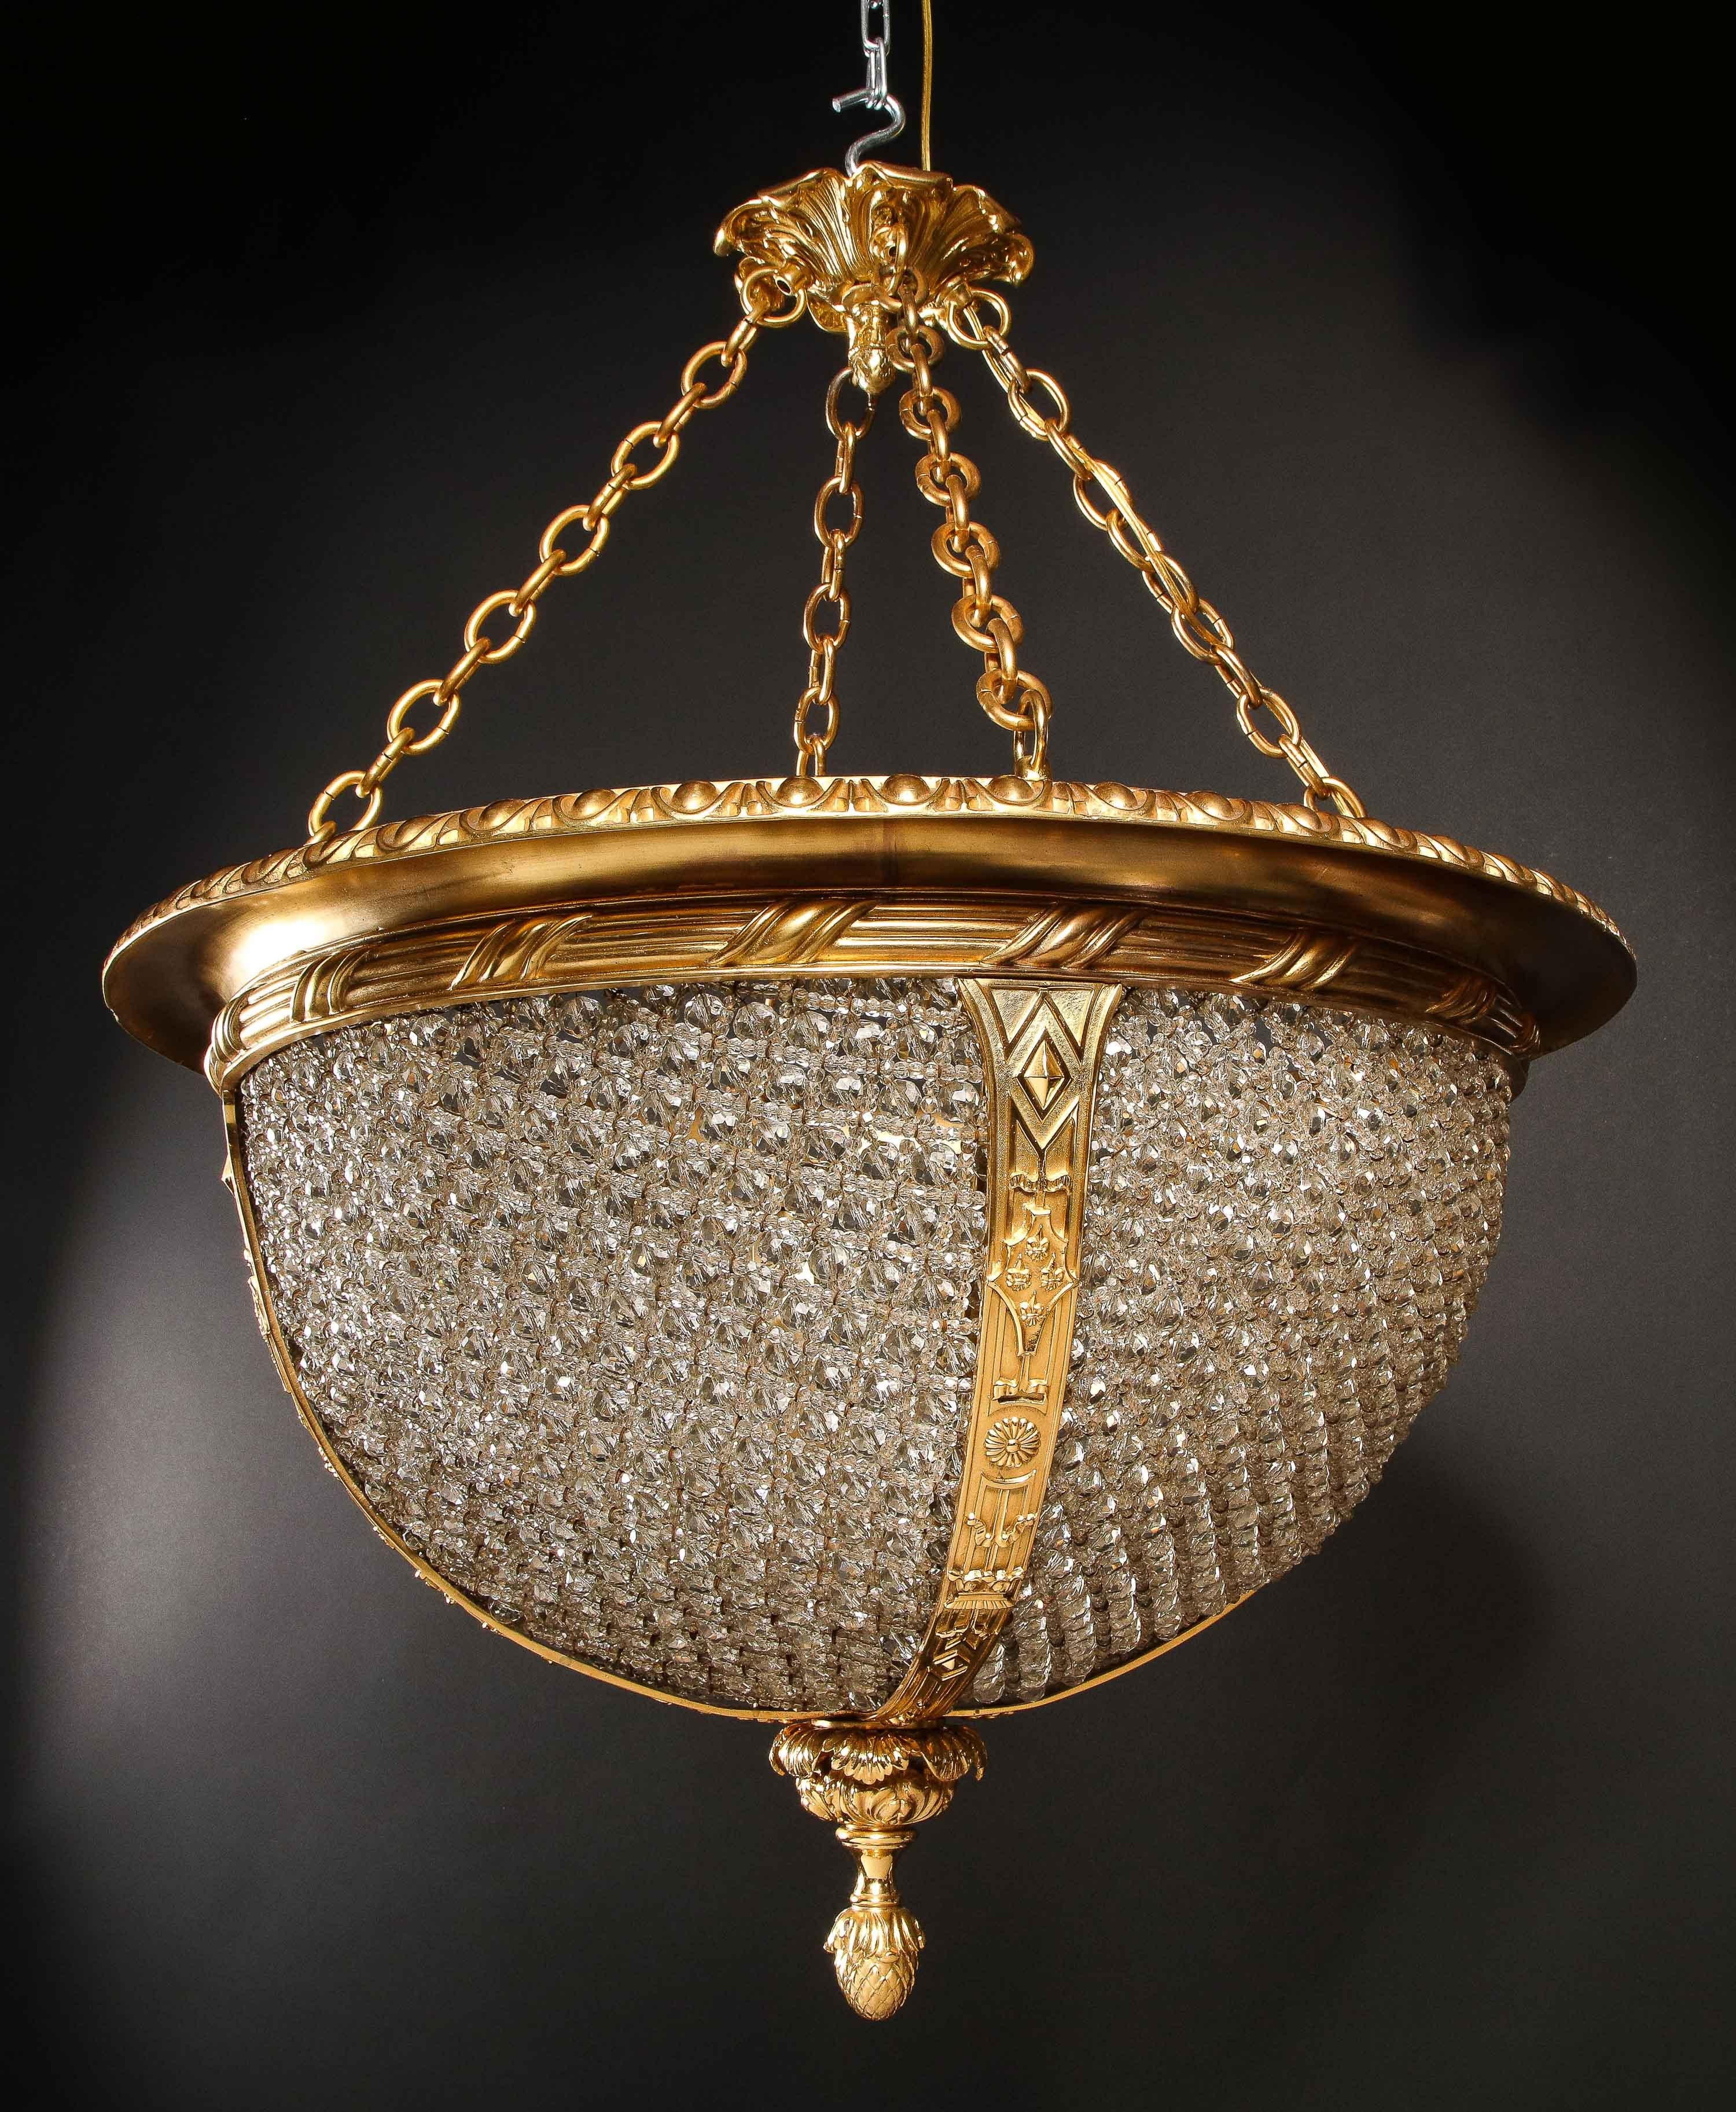 A Spectacular and Large Hollywood Regency Gilt Bronze and hand Beaded Glass Multi Light Chandelier of exquisite craftsmanship.  This rare chandelier is of circular form made of solid gilt bronze decorated with raised motifs embellished with many